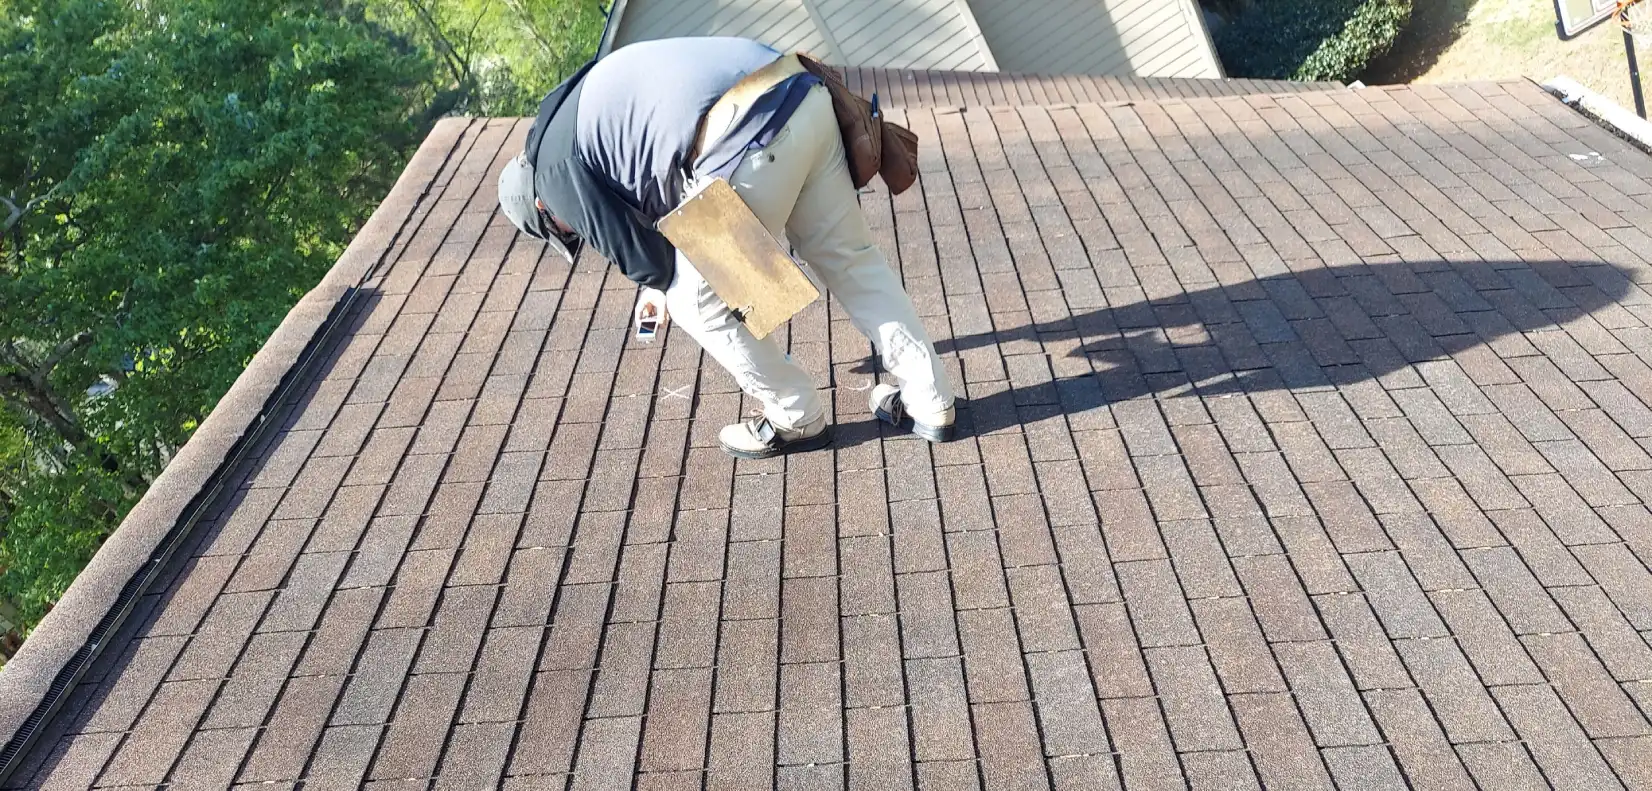 ROOFING CONTRACTOR IN ROSWELL, GA